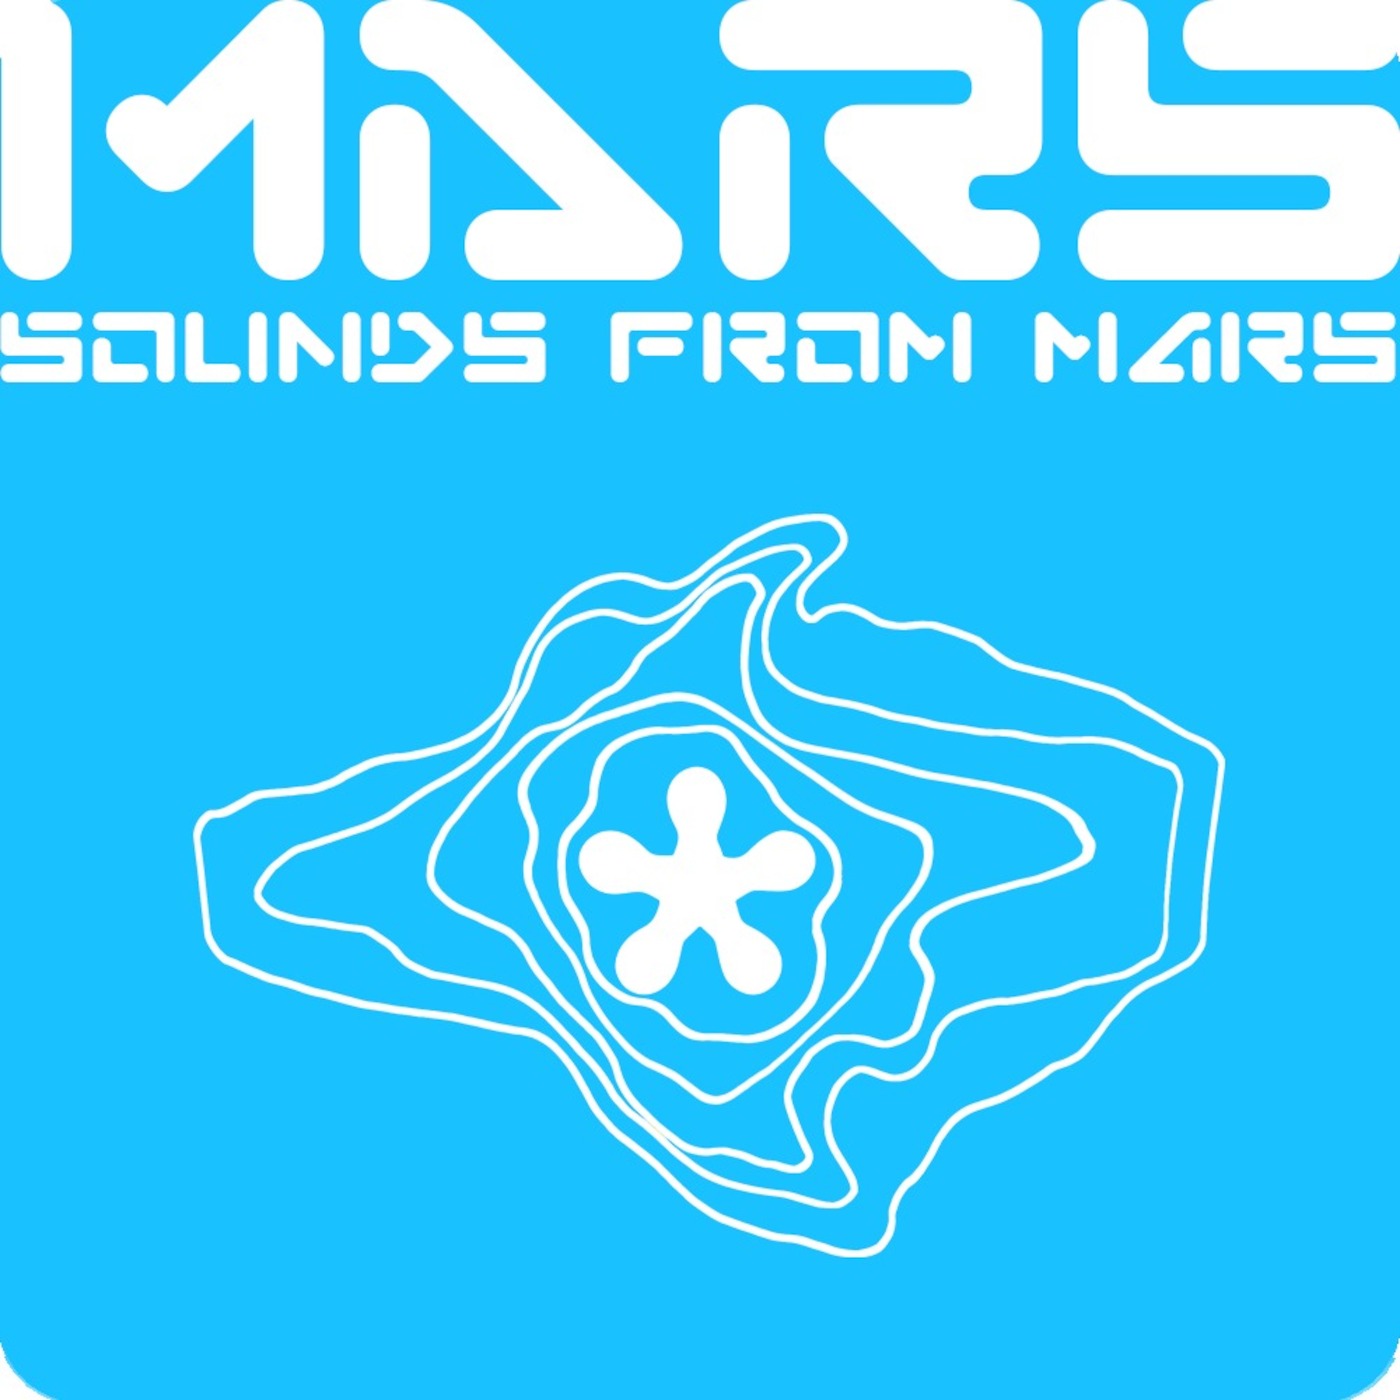 Sounds From Mars podcast